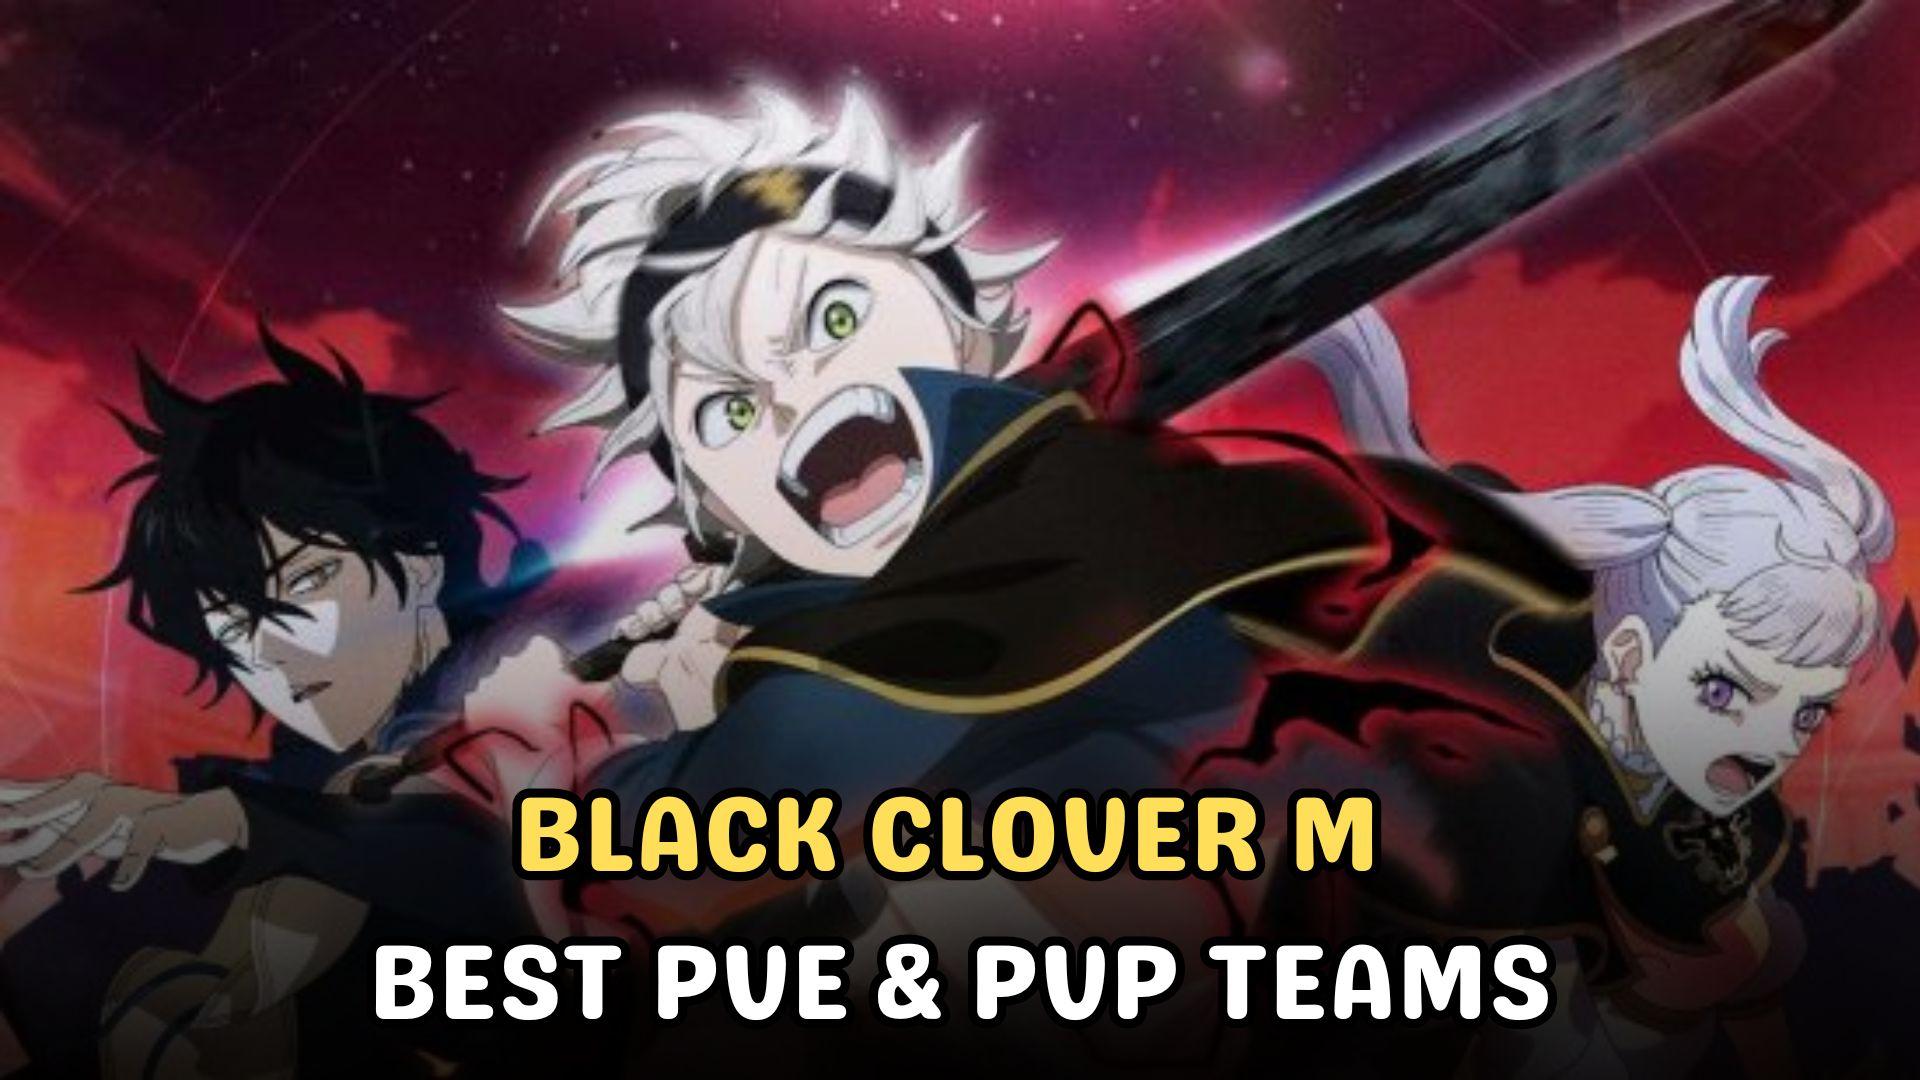 Black Clover Mobile: The Opening of Fate - New name for open-world